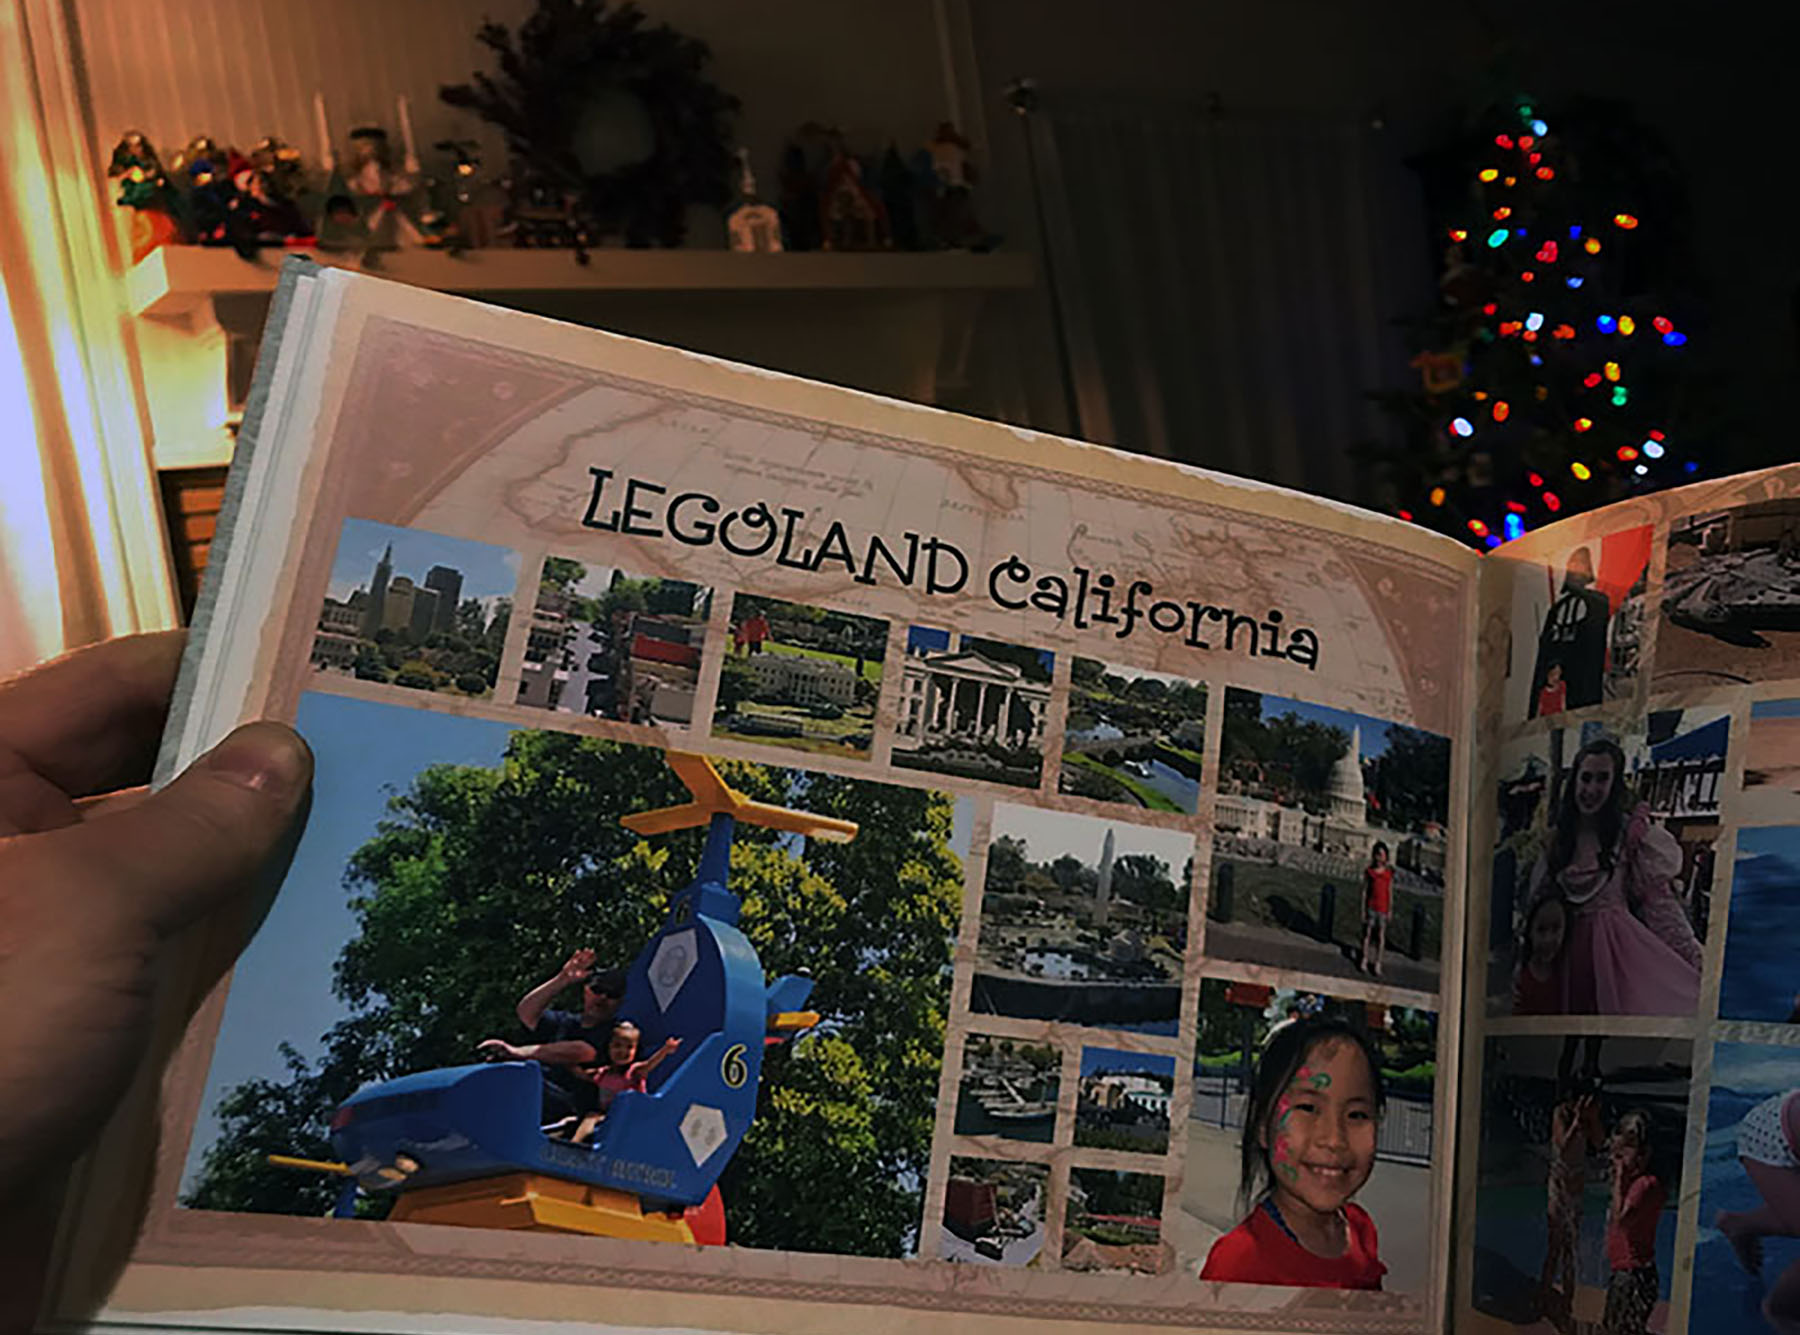 PHOTO BOOKS CAN MAKE THE PERFECT GIFT